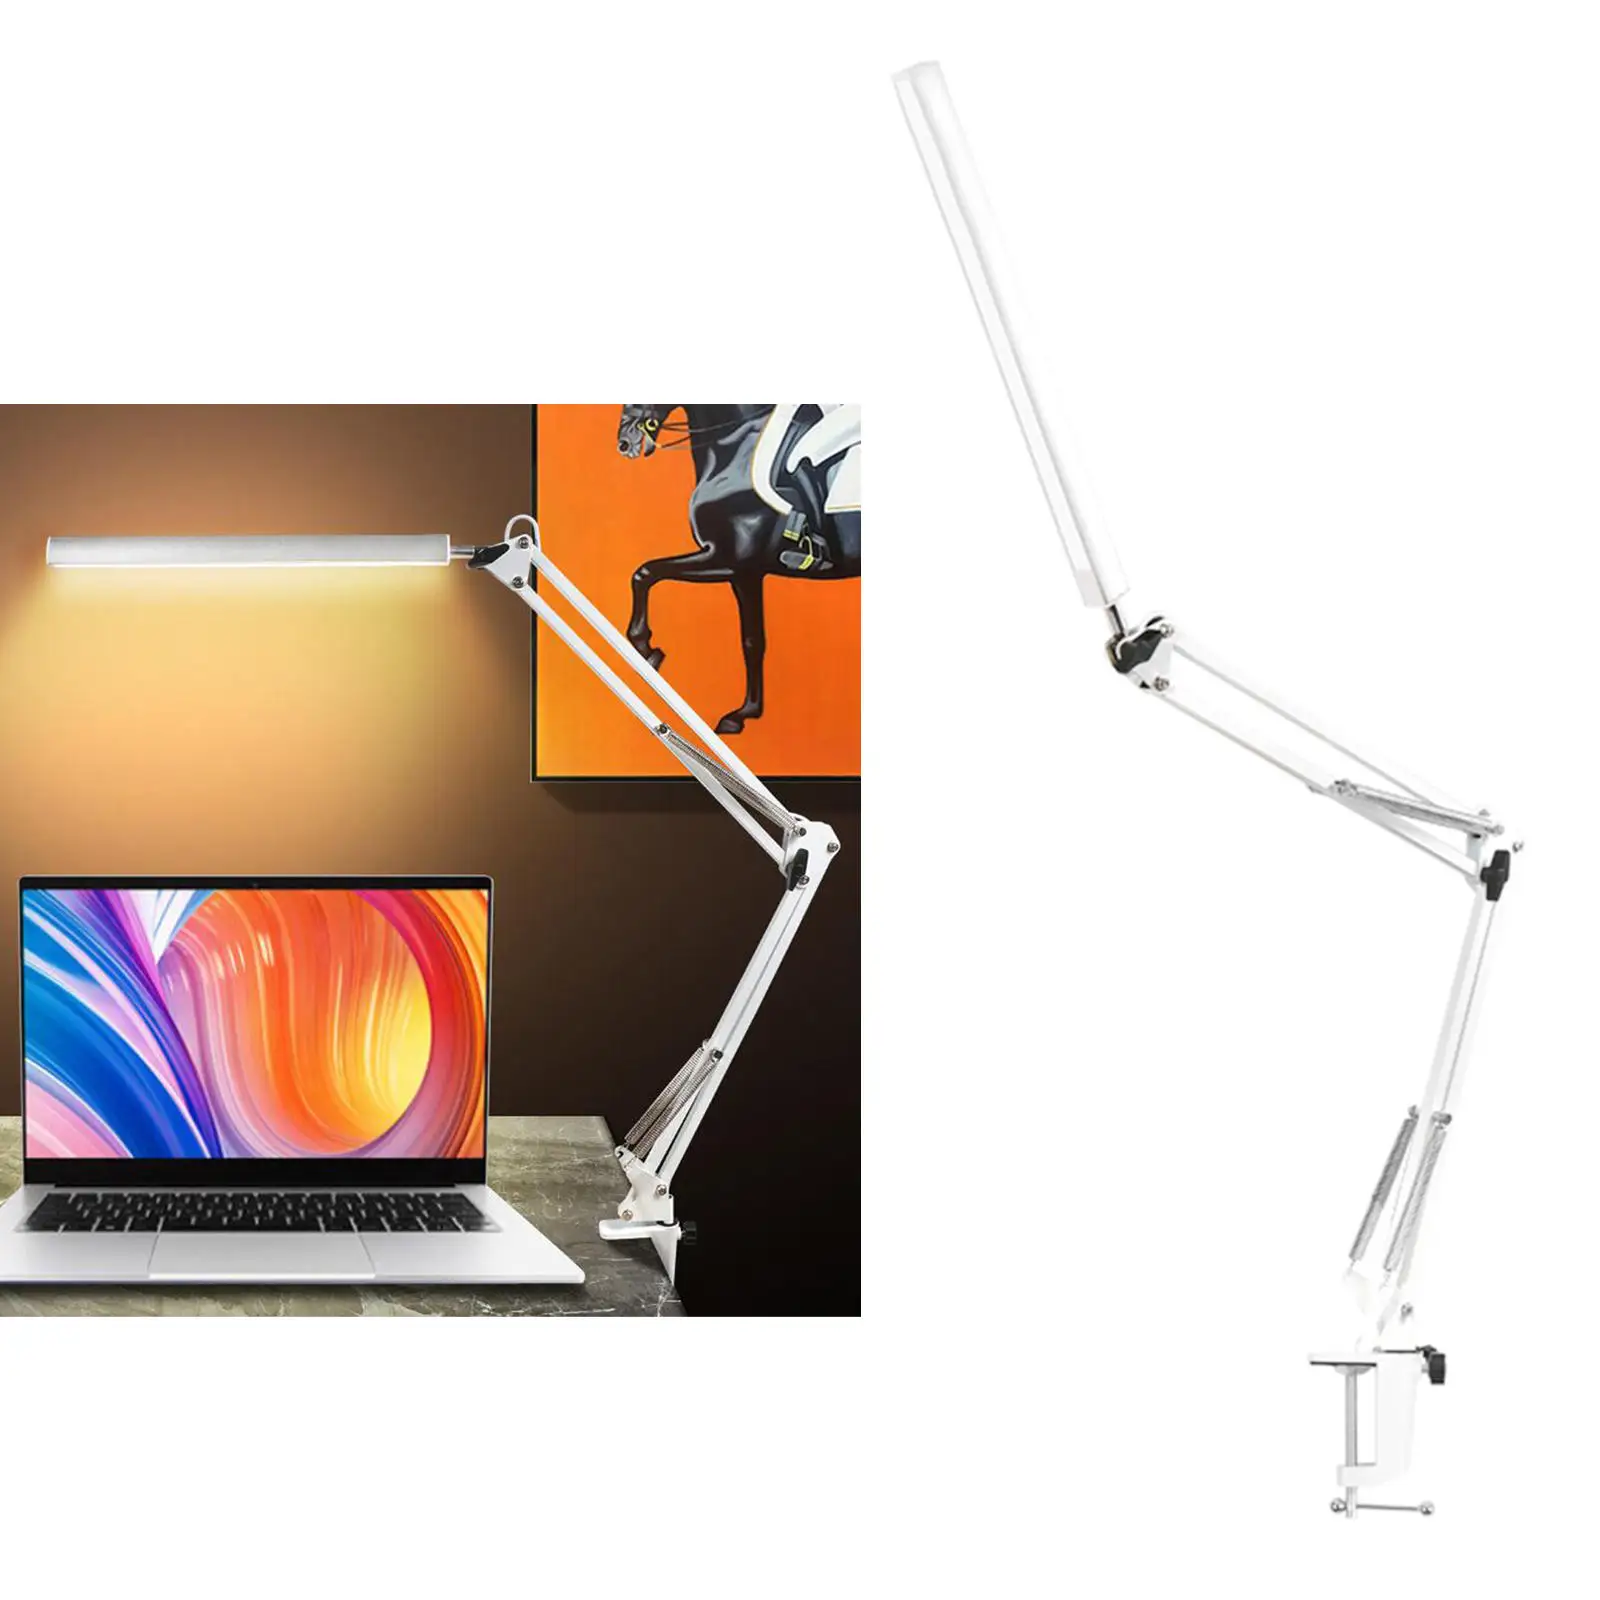 LED Desk Lamp Table Light Swing Arm with Clamp Eye-Caring Adjustable Dimmable Lamp for Study Reading Home Office Bedroom